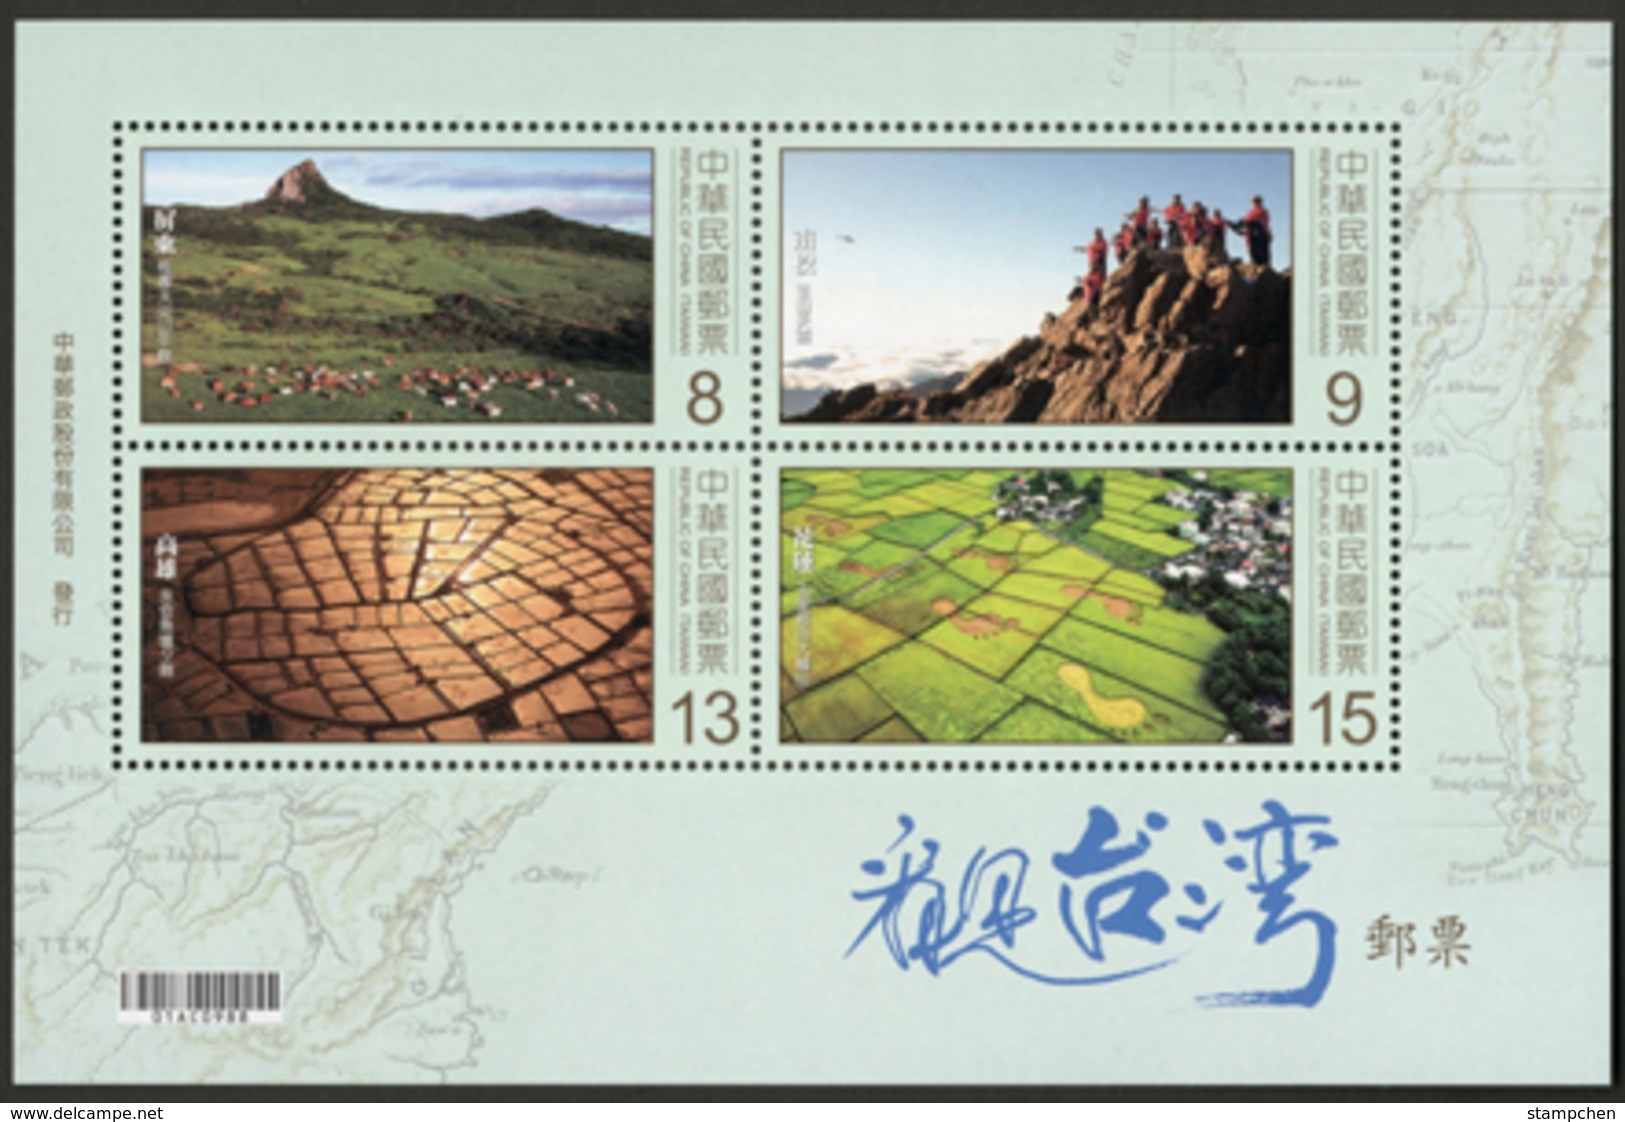 2018 Taiwan From The Air Stamps S/s Cattle Cow Mount Fish Paddy Field Farm Map Helicopter - Geography